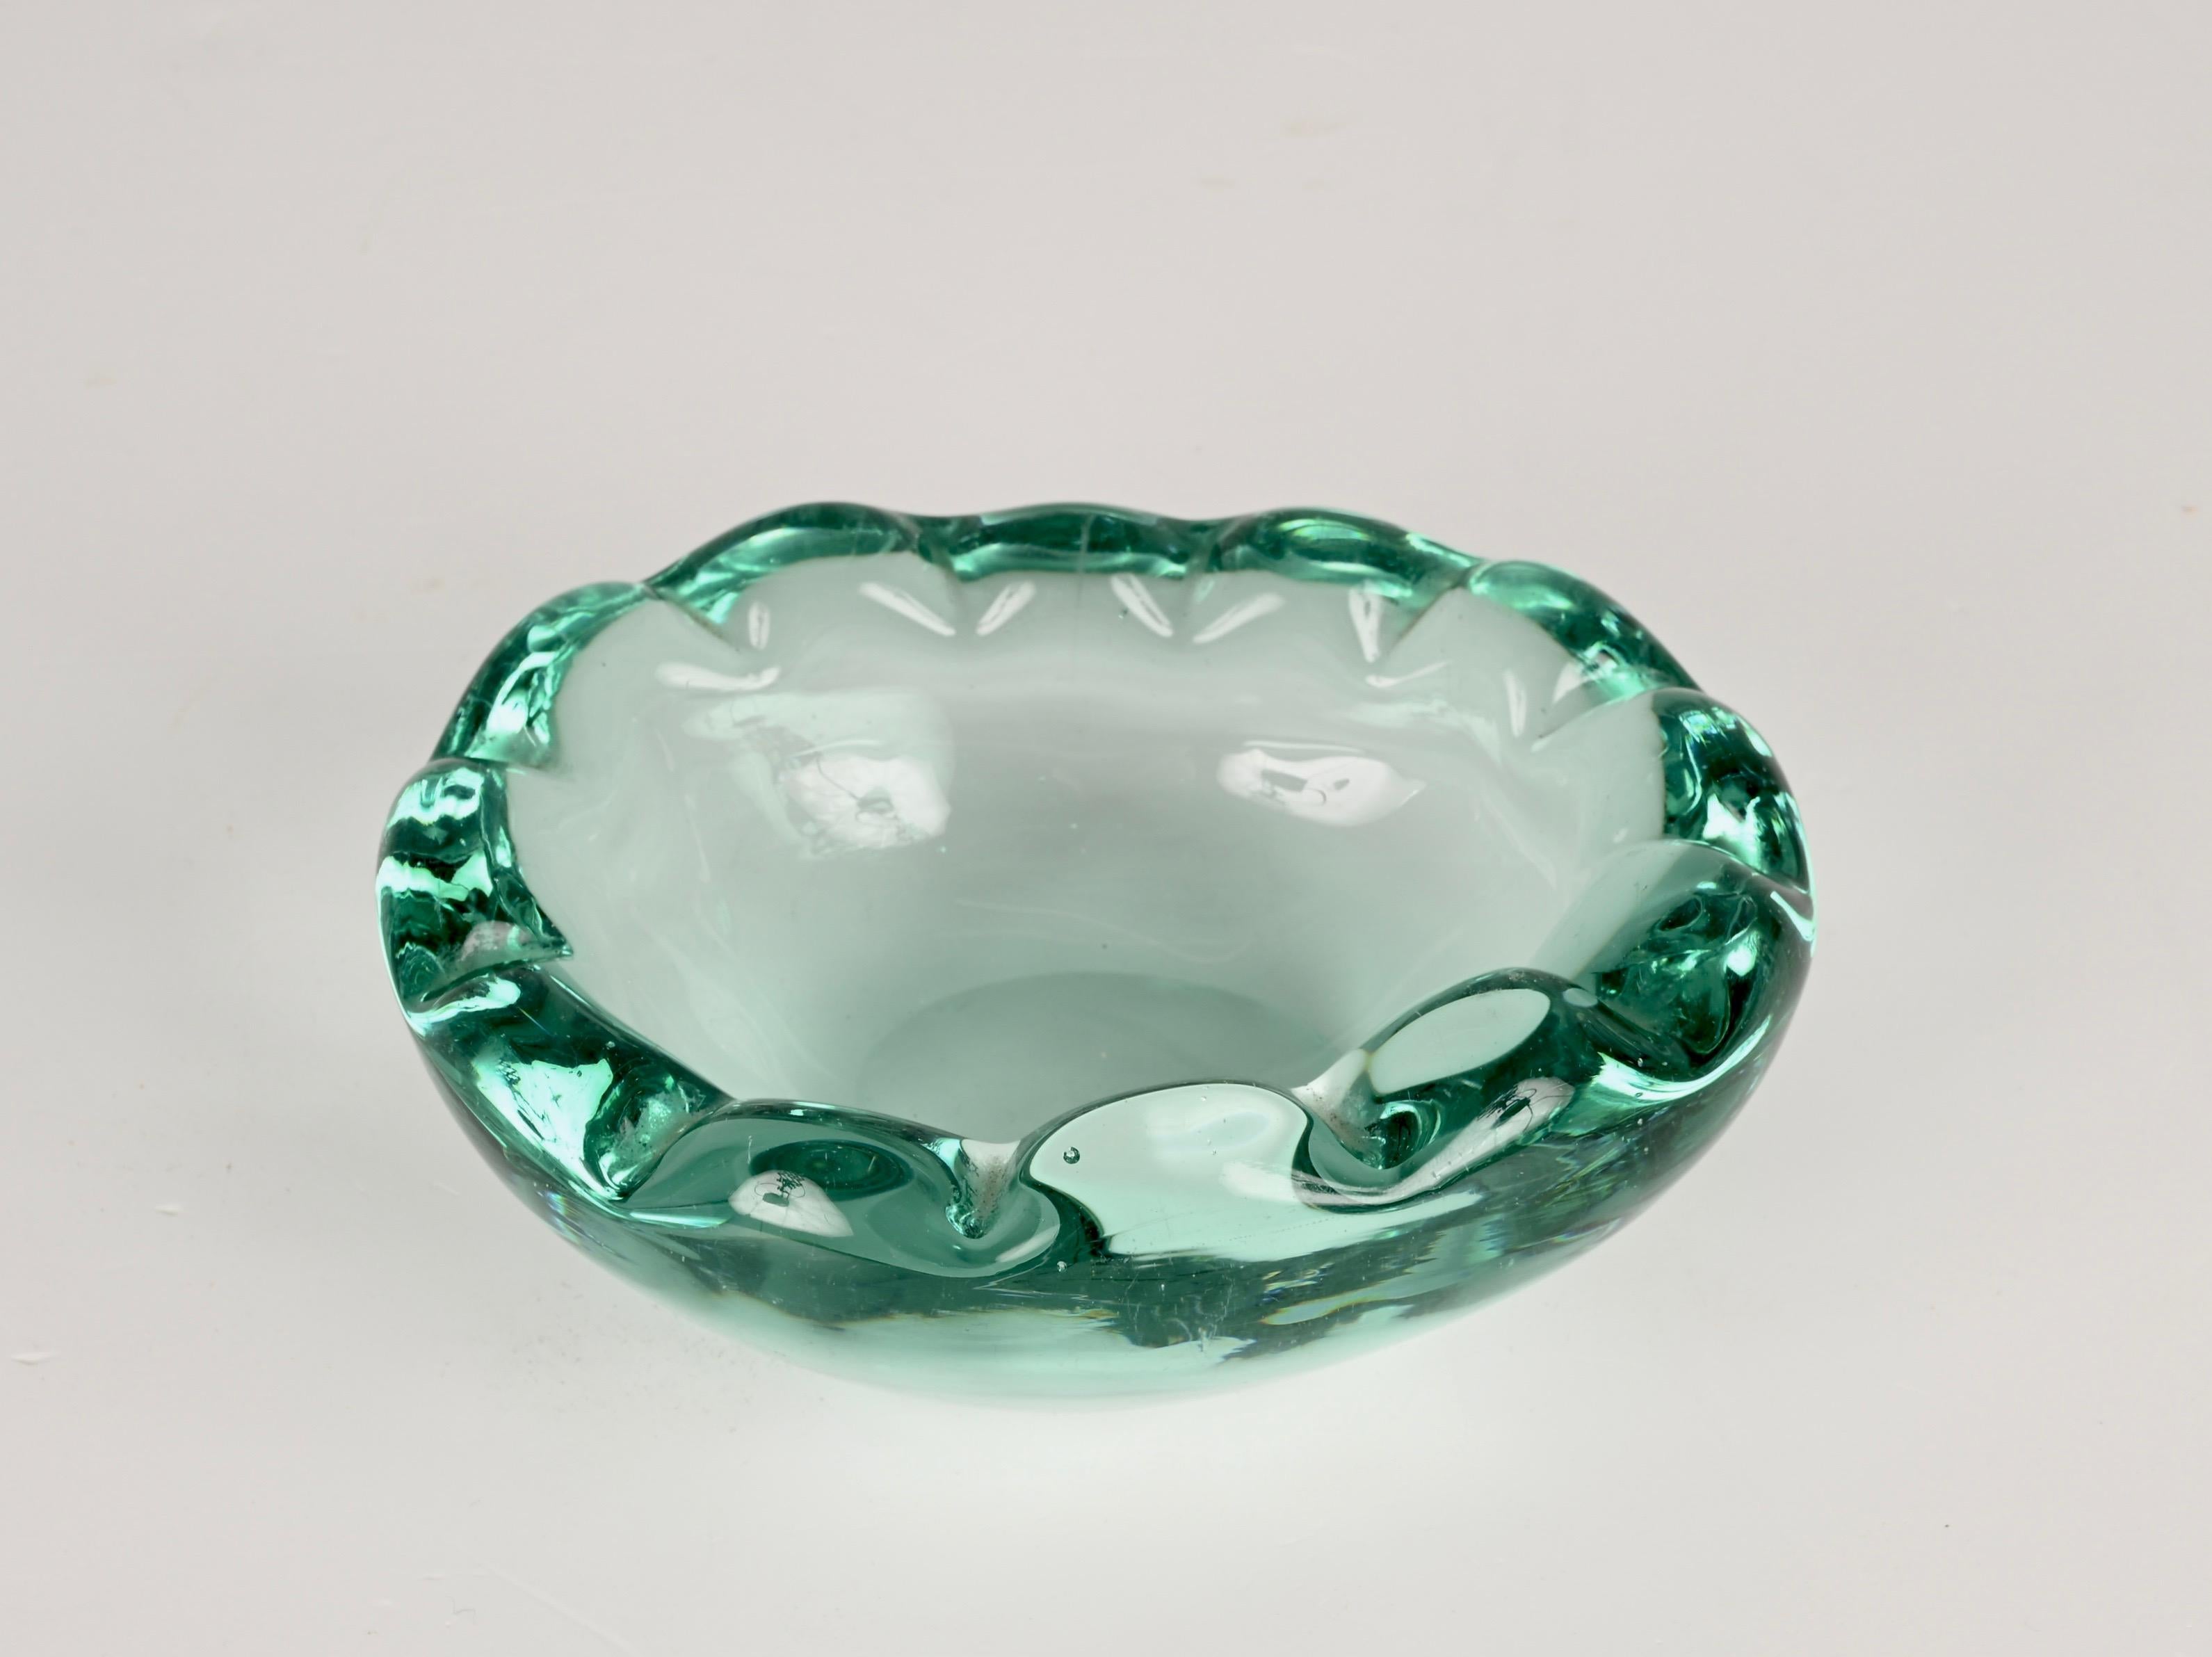 Wonderful mid-century sommerso Murano crystal green glass decorative bowl or ashtray. This magnificent piece was produced in Italy during the 1960s.

This centrepiece is unique thanks to the clean way in which the piece was designed and the purity